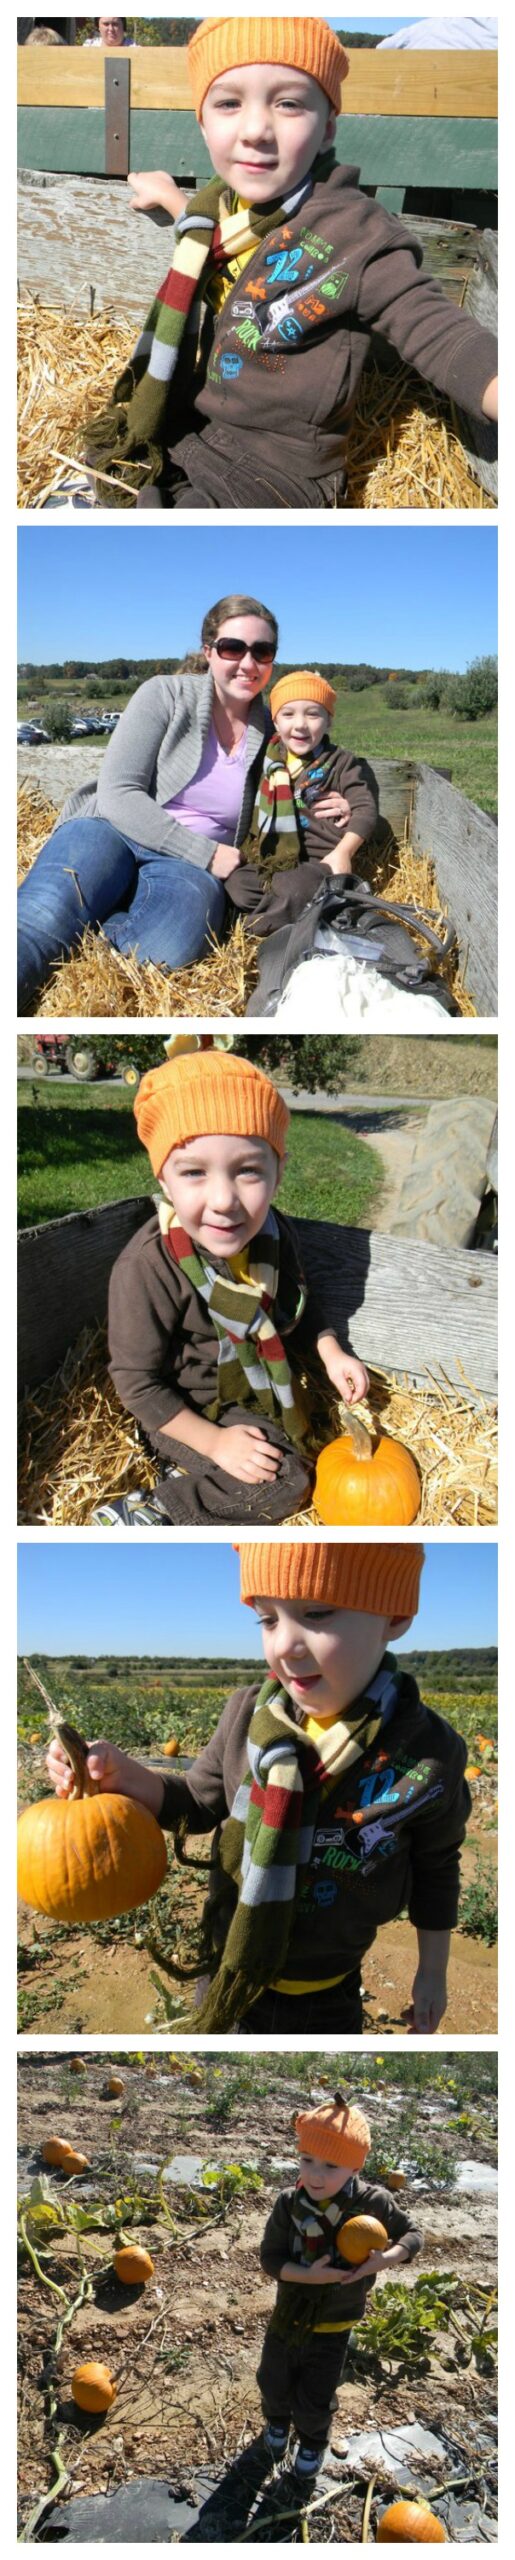 Pumpkin Sweater Hat How to turn an old sweater into an adorable fall hat for your toddler. This is a great beginner sewing project!